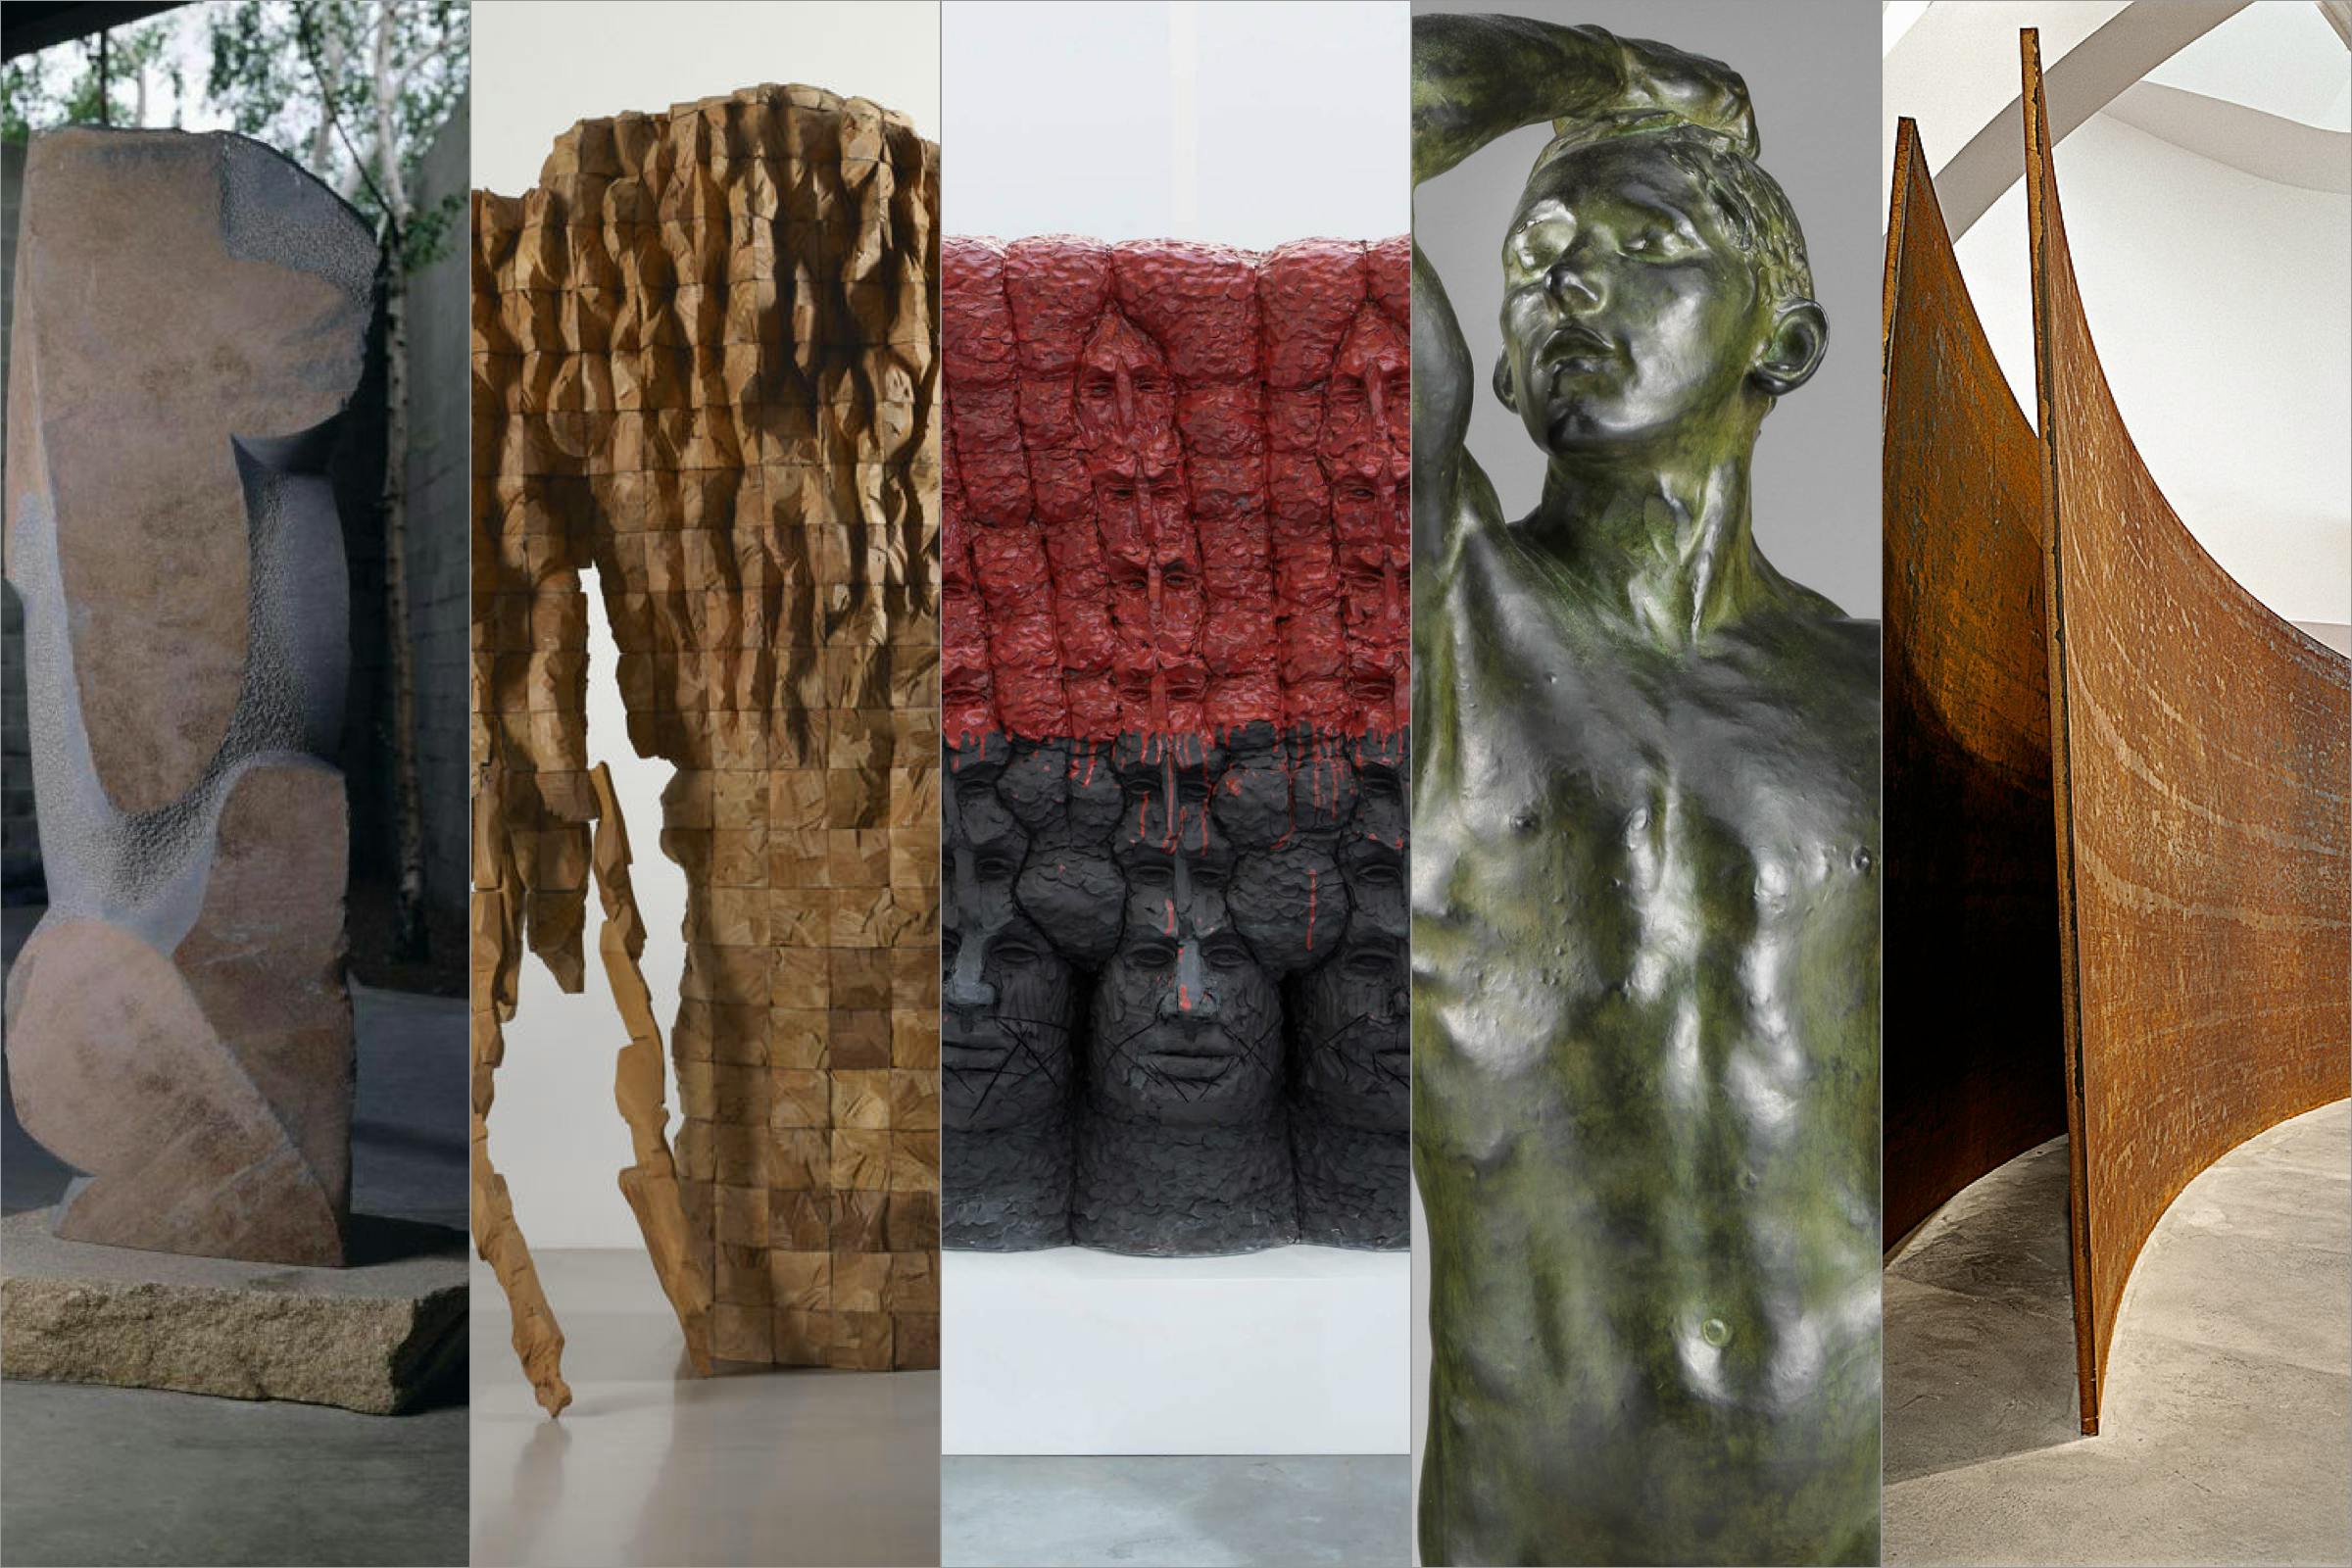 Images of “Venus” by Isamu Noguchi, “Right Arm Bowl” by Ursula von Rydingsvard, “ONE'-TEH” by Raven Halfmoon, “The Age of Bronze” by Auguste Rodin, and “Snake” by Richard Serra